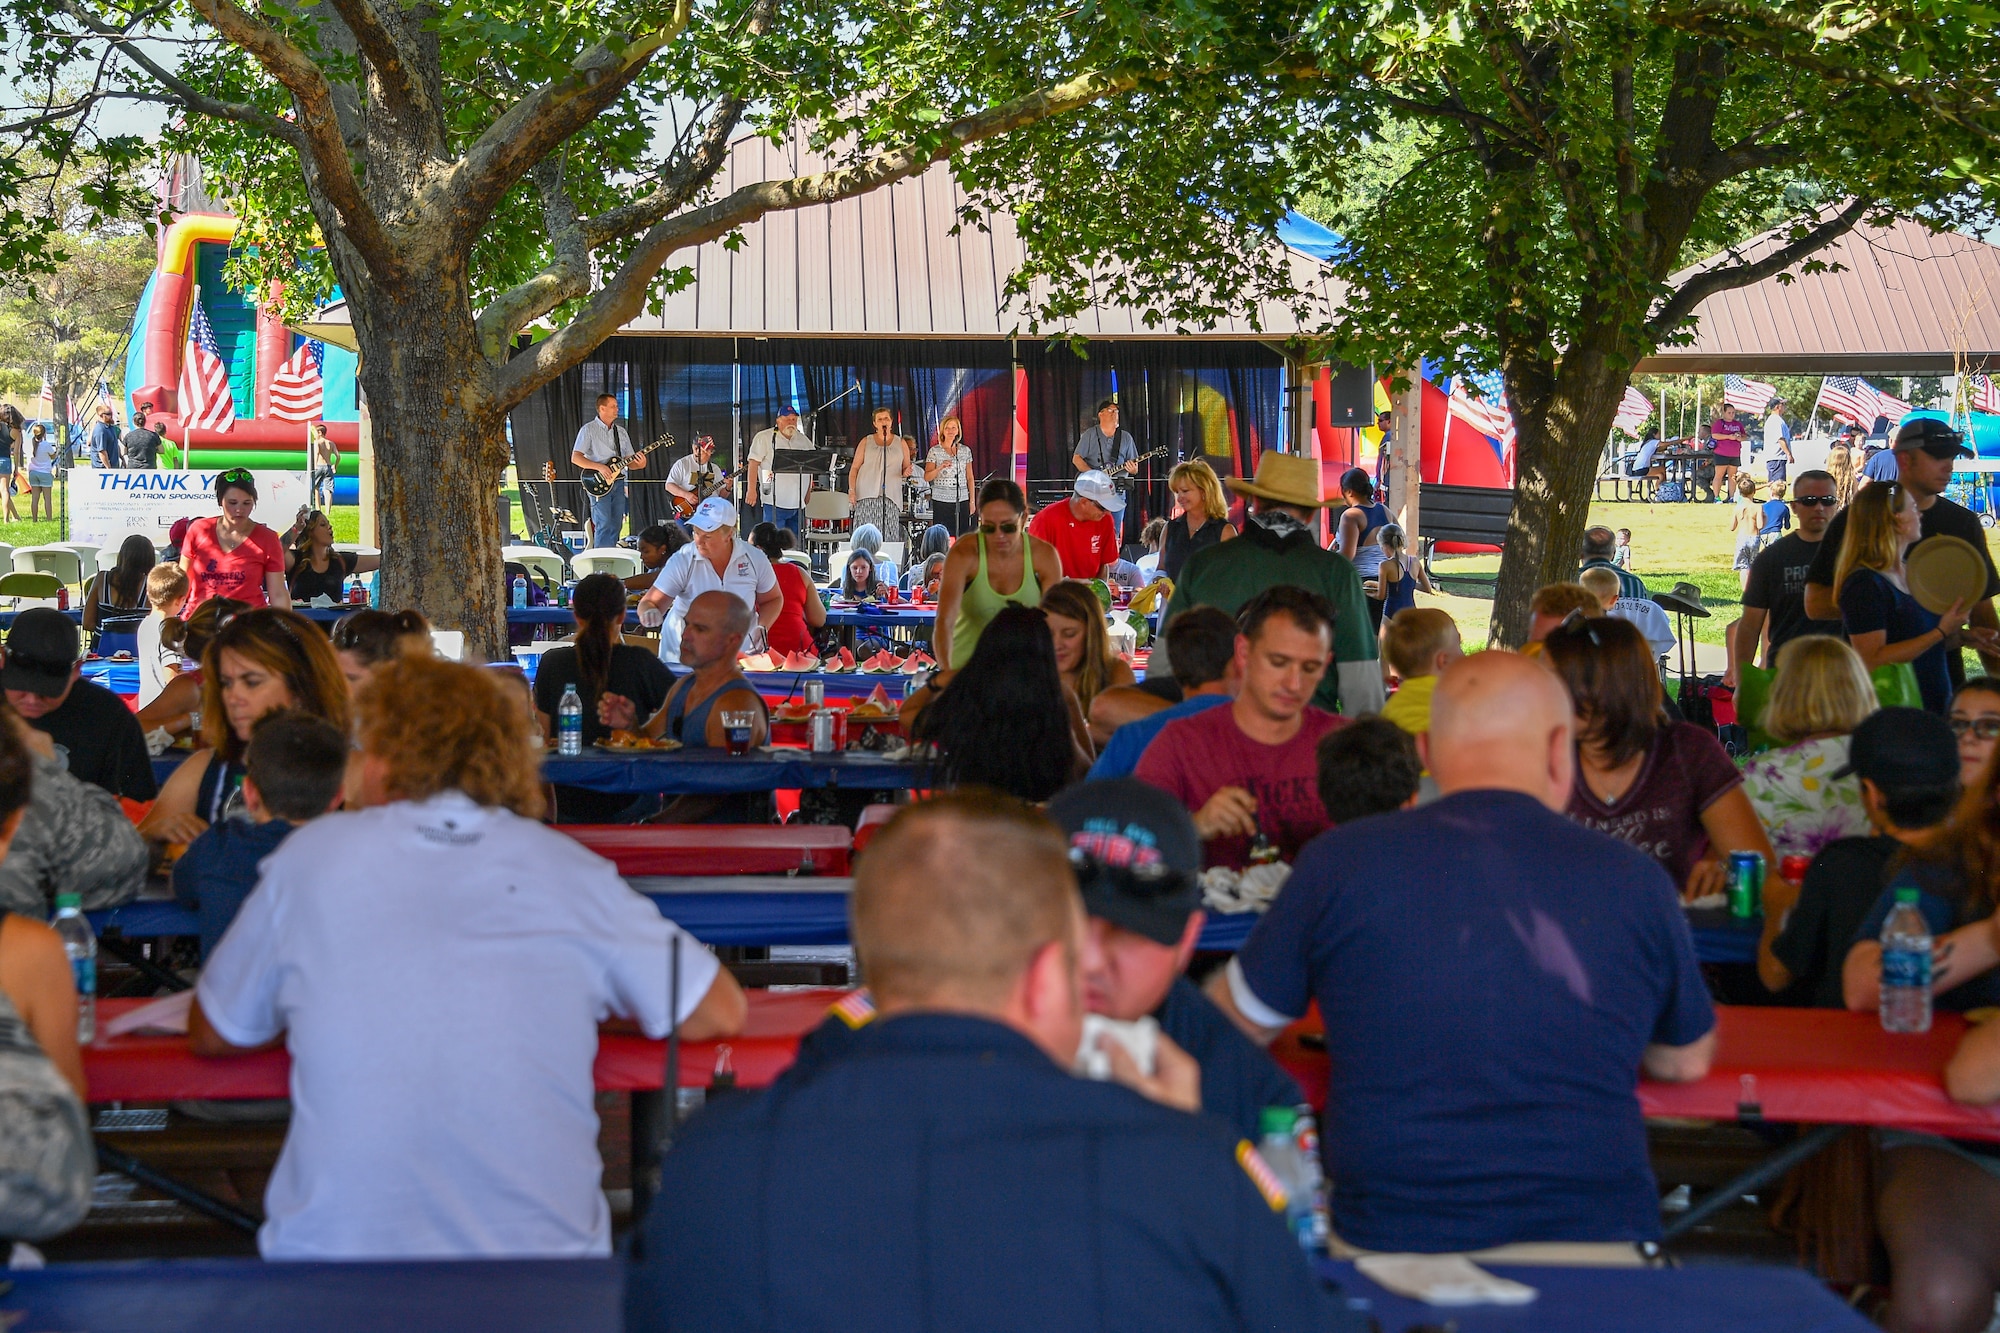 Families listen to live entertainment during the Salute Picnic Aug. 17, 2018, at Hill Air Force Base, Utah. This was the 18th year the Top of Utah Military Affairs Committee has sponsored the picnic. (U.S. Air Force photo by R. Nial Bradshaw)